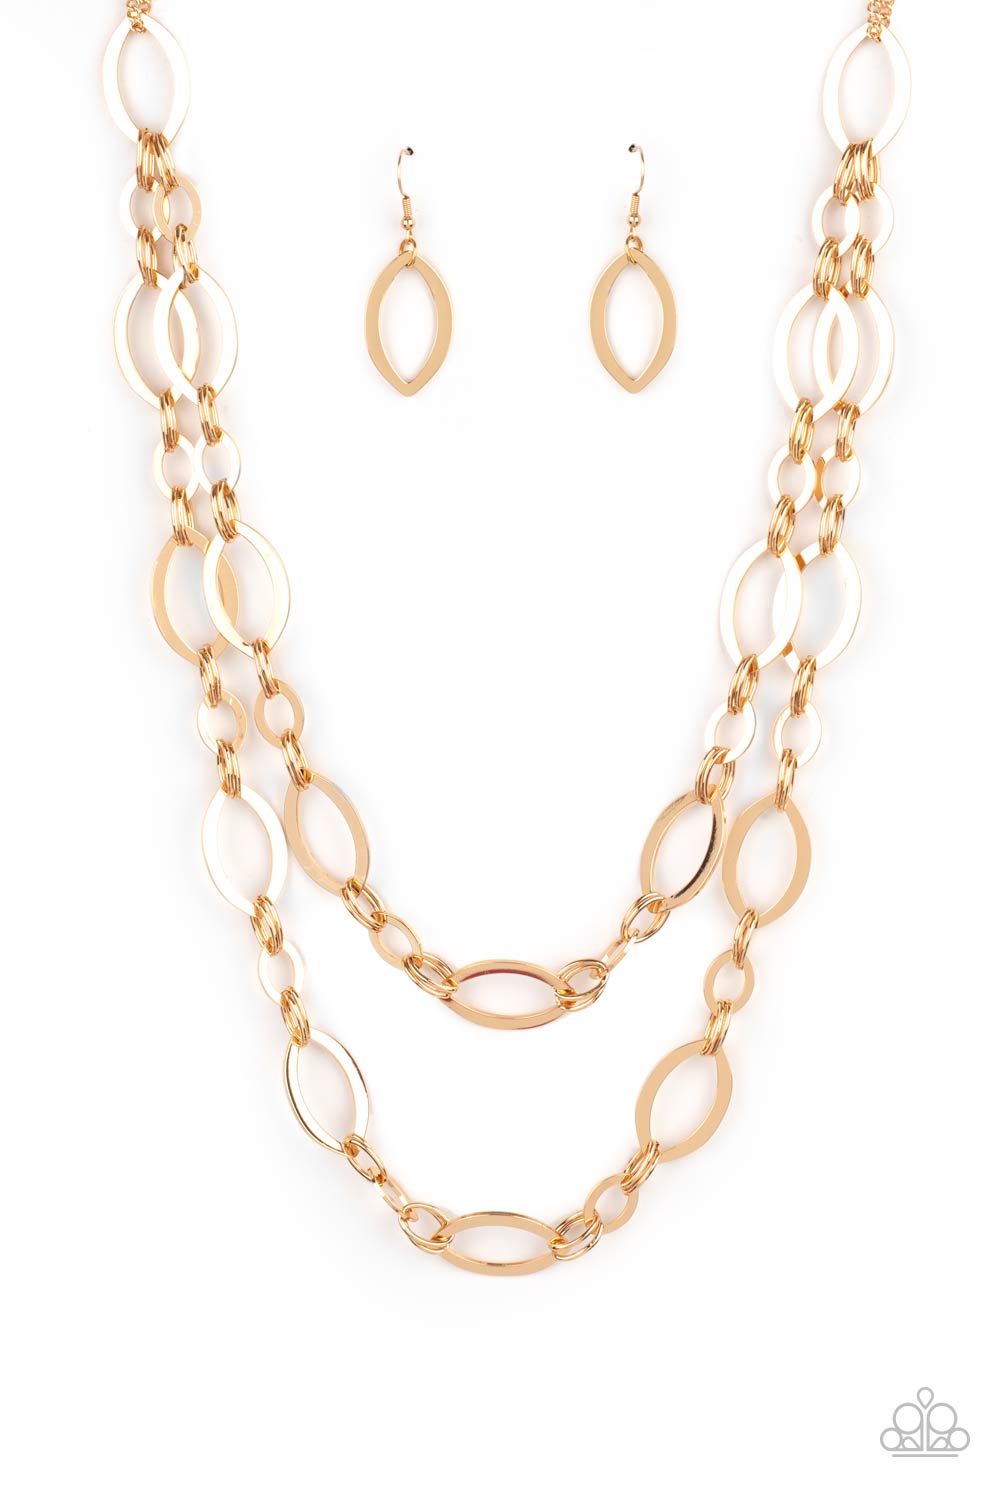 The OVAL-achiever Gold Necklace - Paparazzi Accessories  Stunning gold ellipses link together for two layers of bold, basic drama. The layers hang from a simple gold chain adding balance to the scene. Features an adjustable clasp closure.  Sold as one individual necklace. Includes one pair of matching earrings.